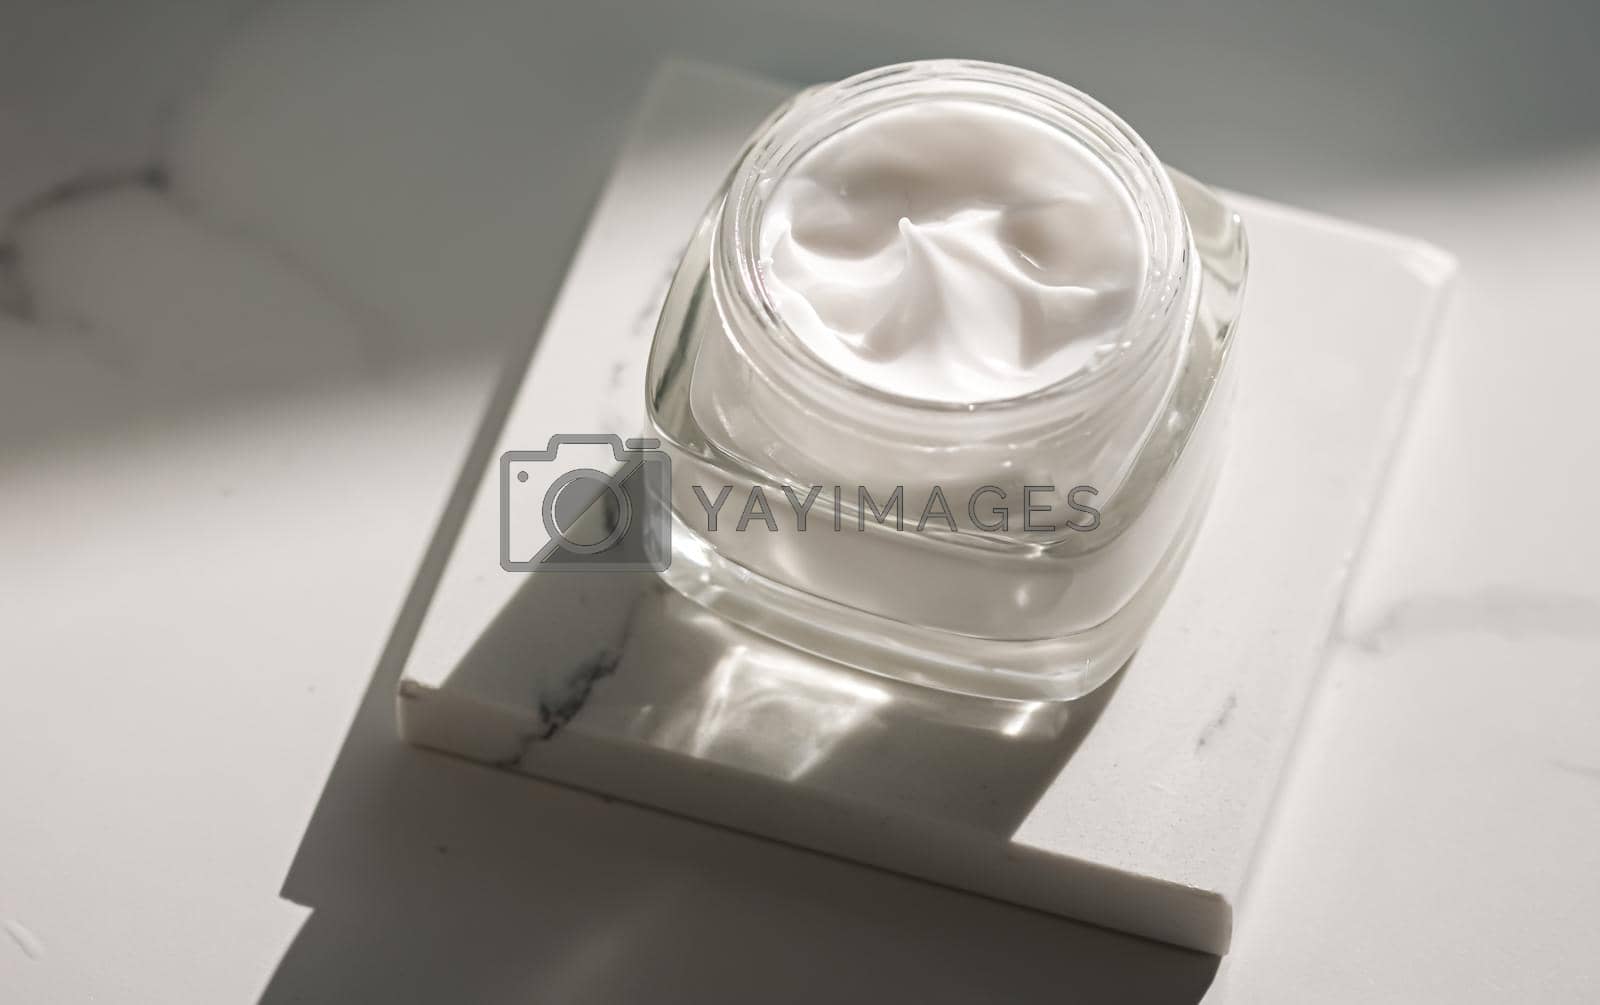 Royalty free image of Face cream moisturiser as skincare and bodycare luxury product, home spa and organic beauty cosmetics for natural skin care morning routine by Anneleven